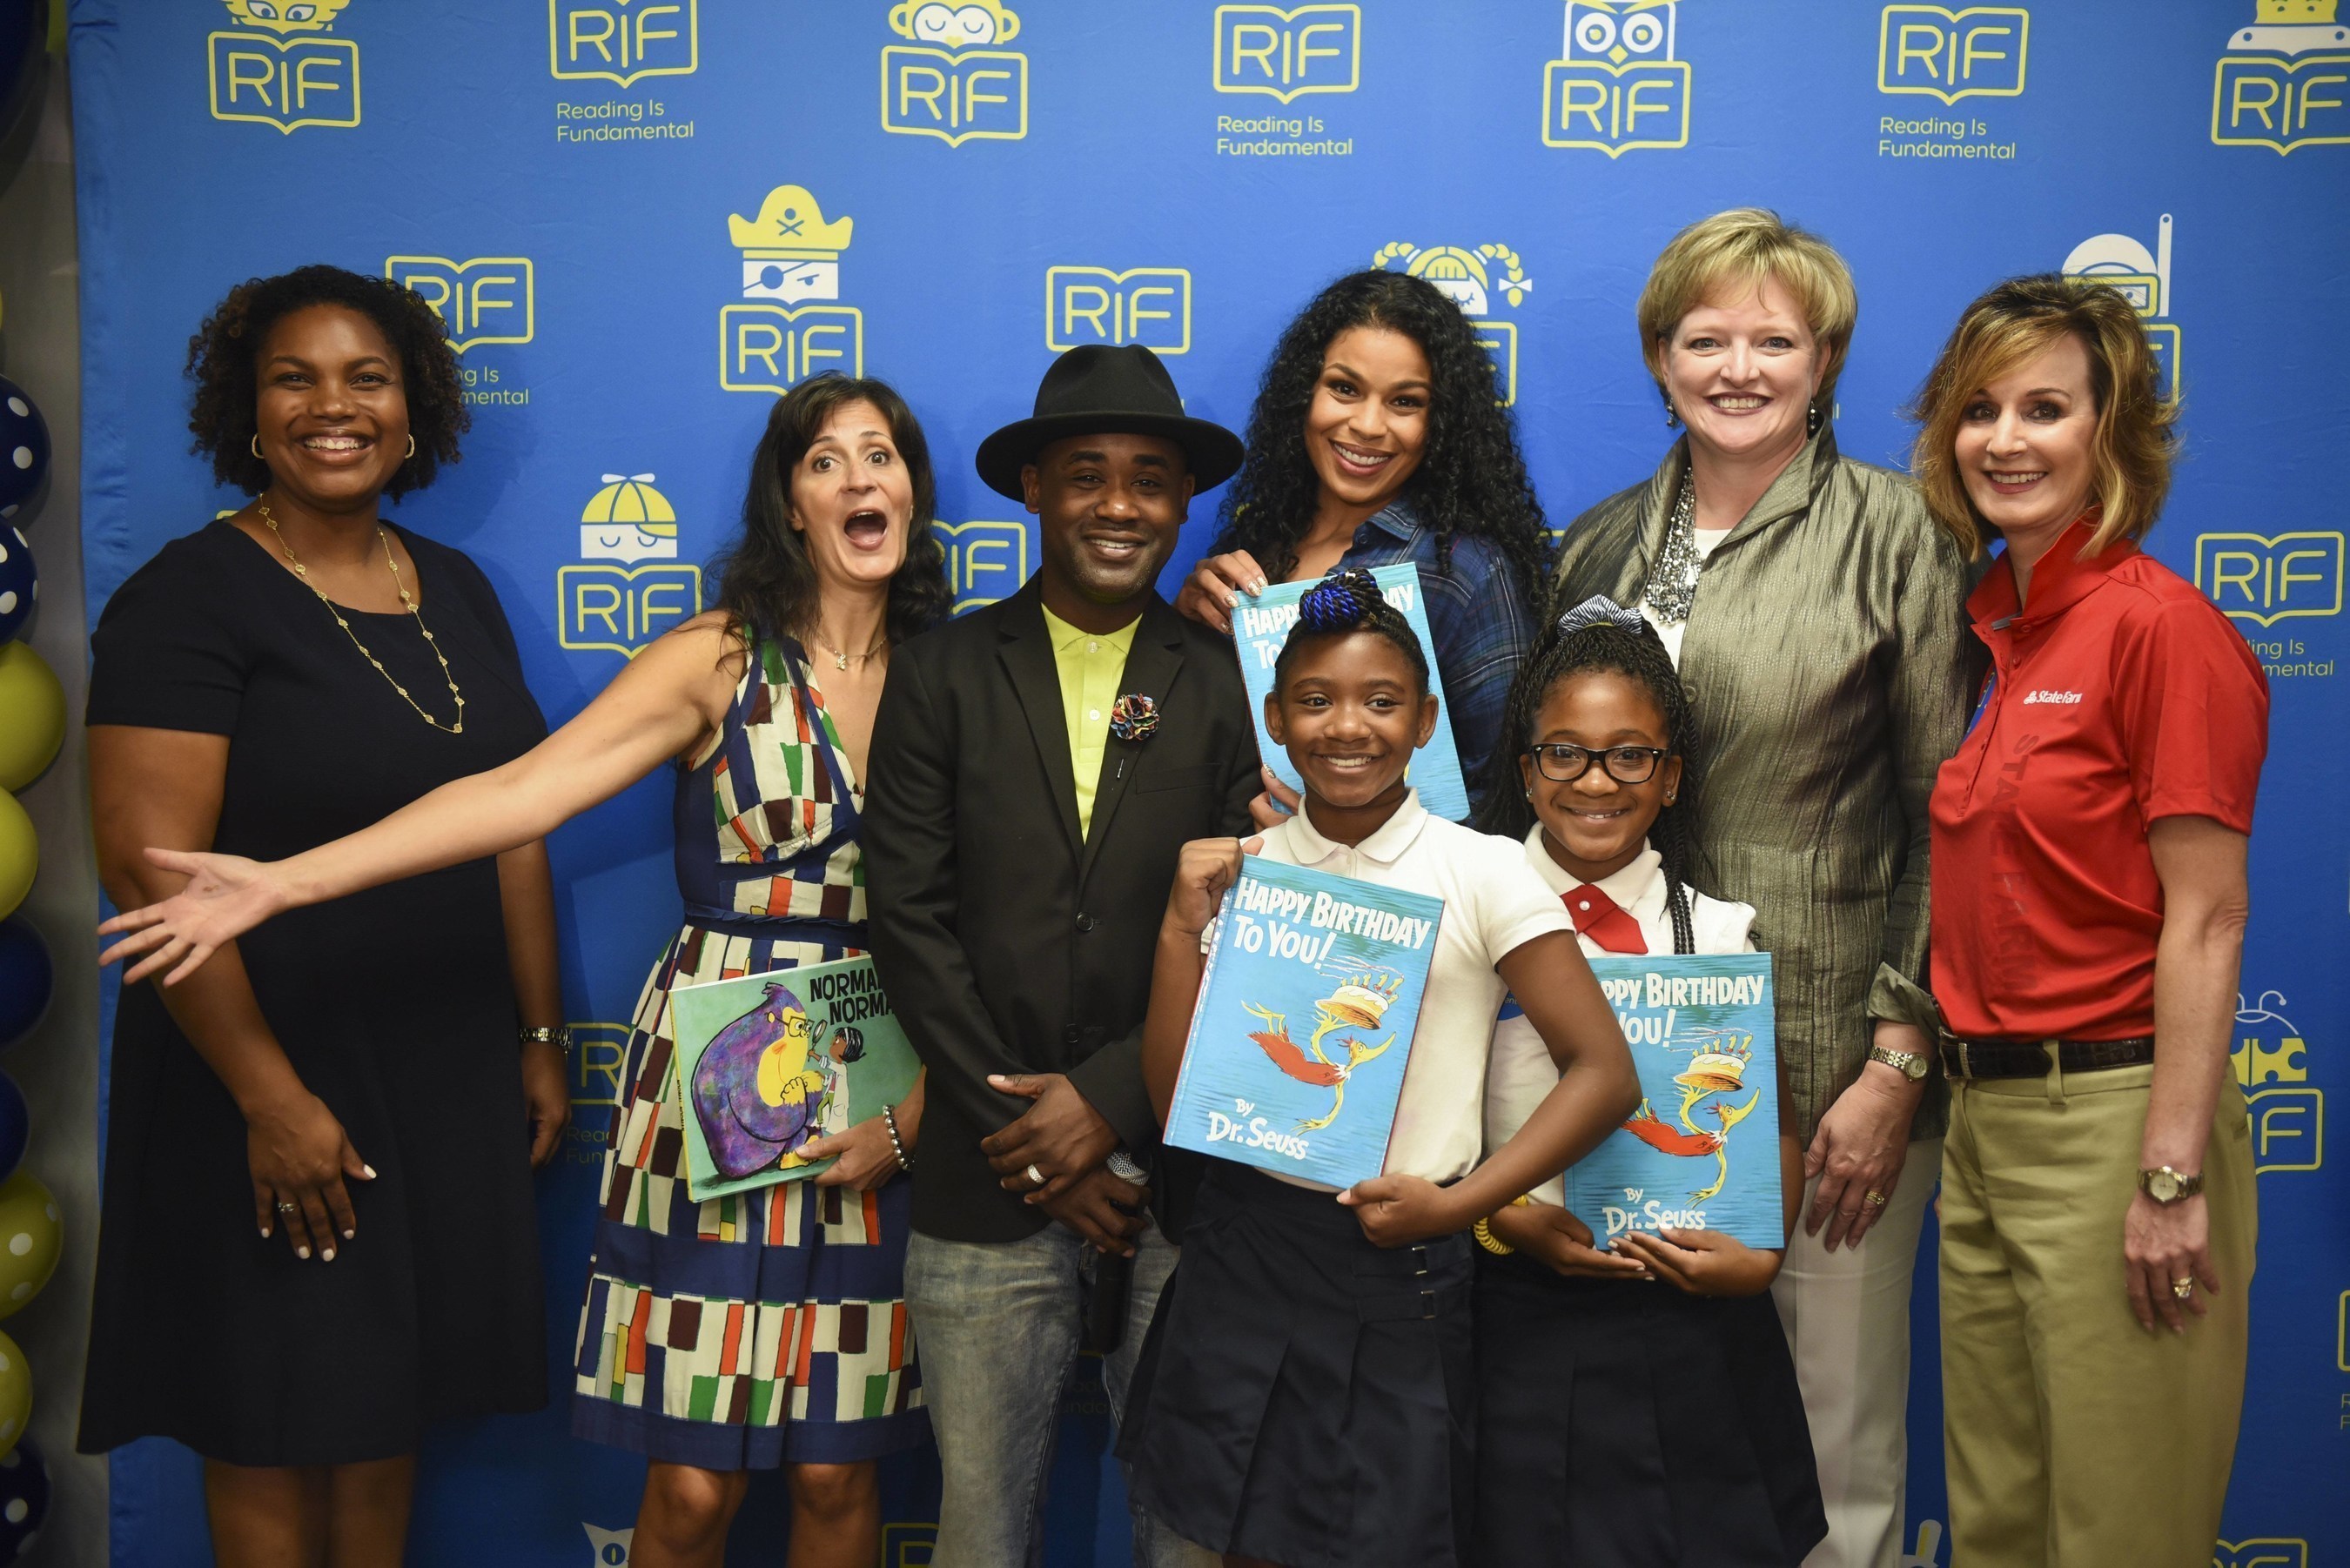 From left, Principal TaMikka Sykes, children's author Tara Lazar, actor/musician Tray Chaney, singer/actress Jordin Sparks, RIF President and CEO Alicia Levi, State Farm Senior Vice President and RIF Board Member Christy Moberly along with two students from Amidon-Bowen Elementary School celebrate Reading Is Fundamental's 50th Anniversary on Wednesday, Sept. 14, 2016, in Washington. (Kevin Wolf/AP Images for Reading Is Fundamental)